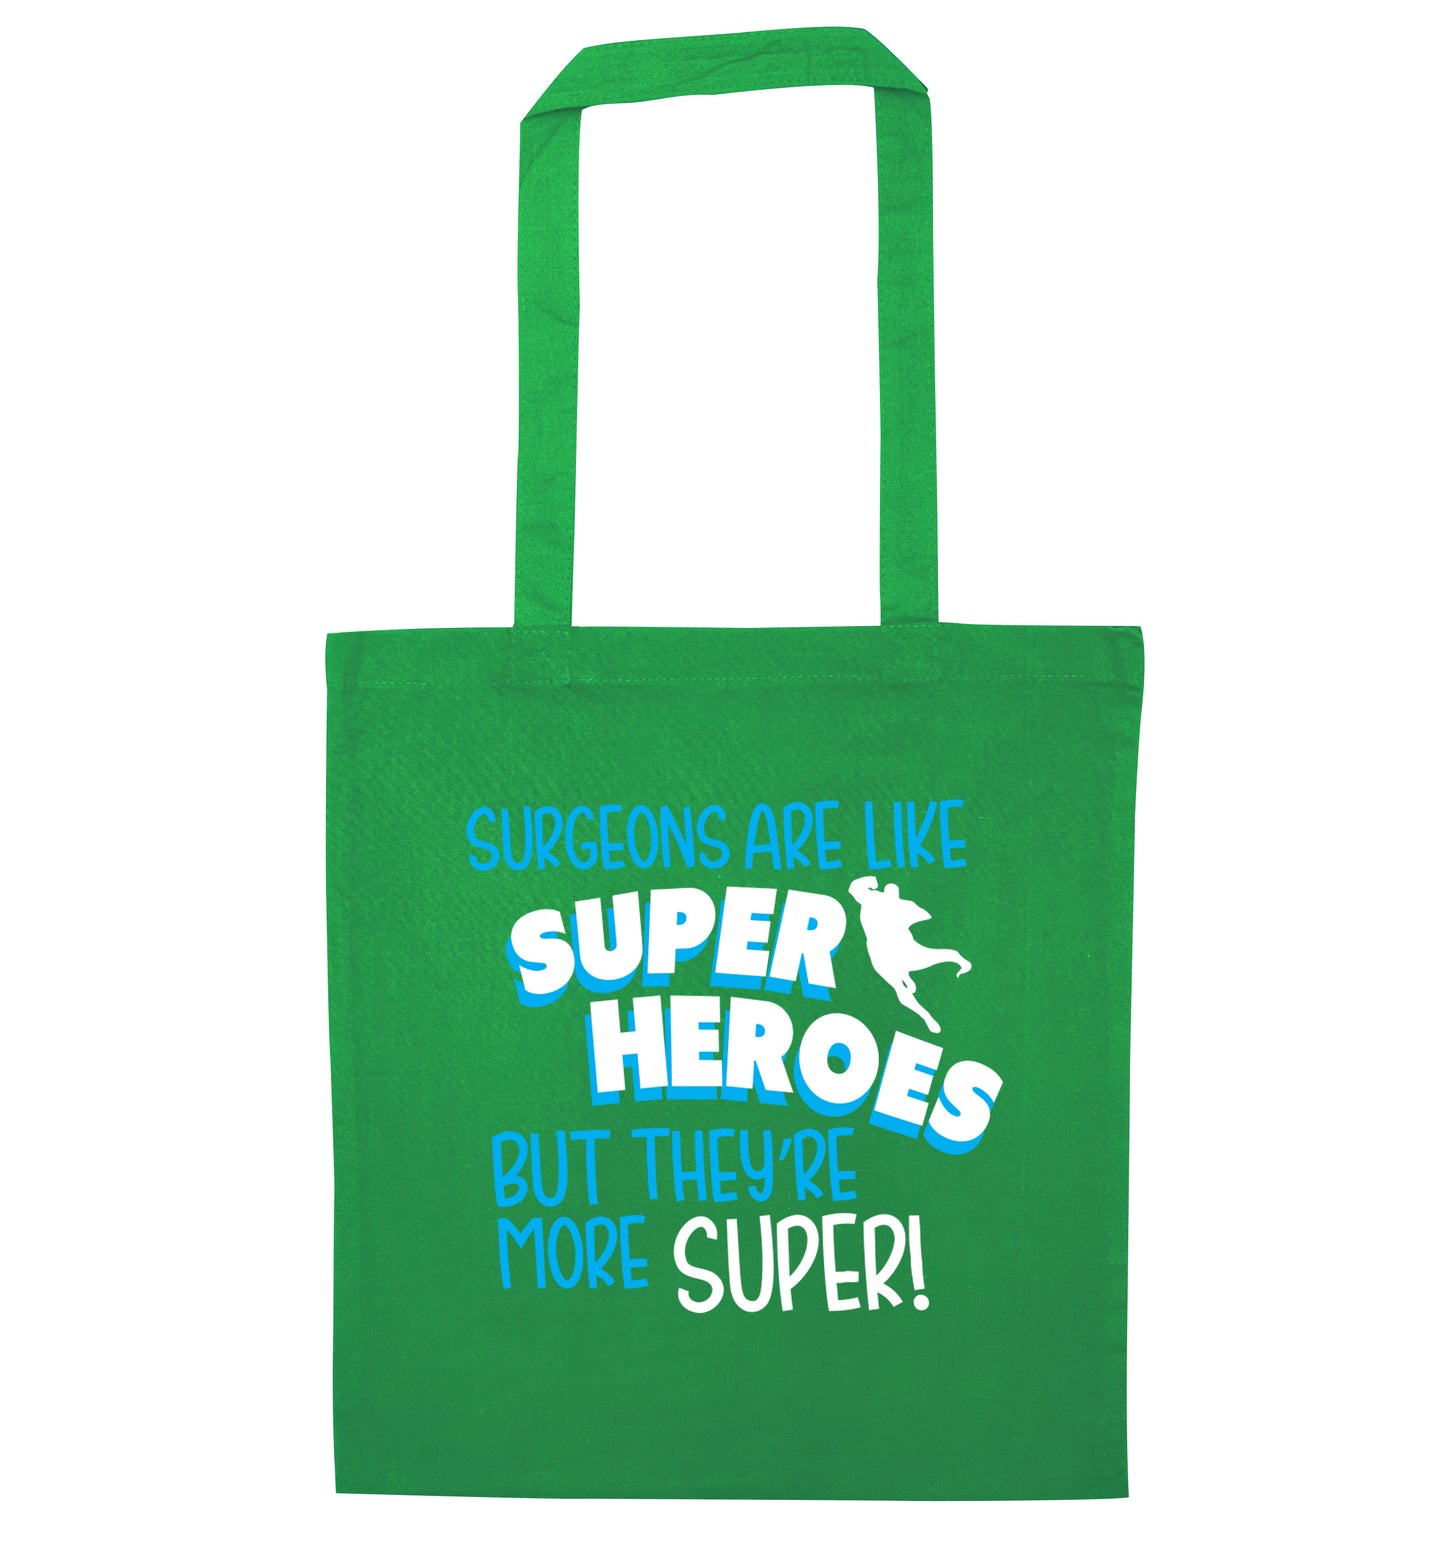 Surgeons are like superheros but they're more super green tote bag